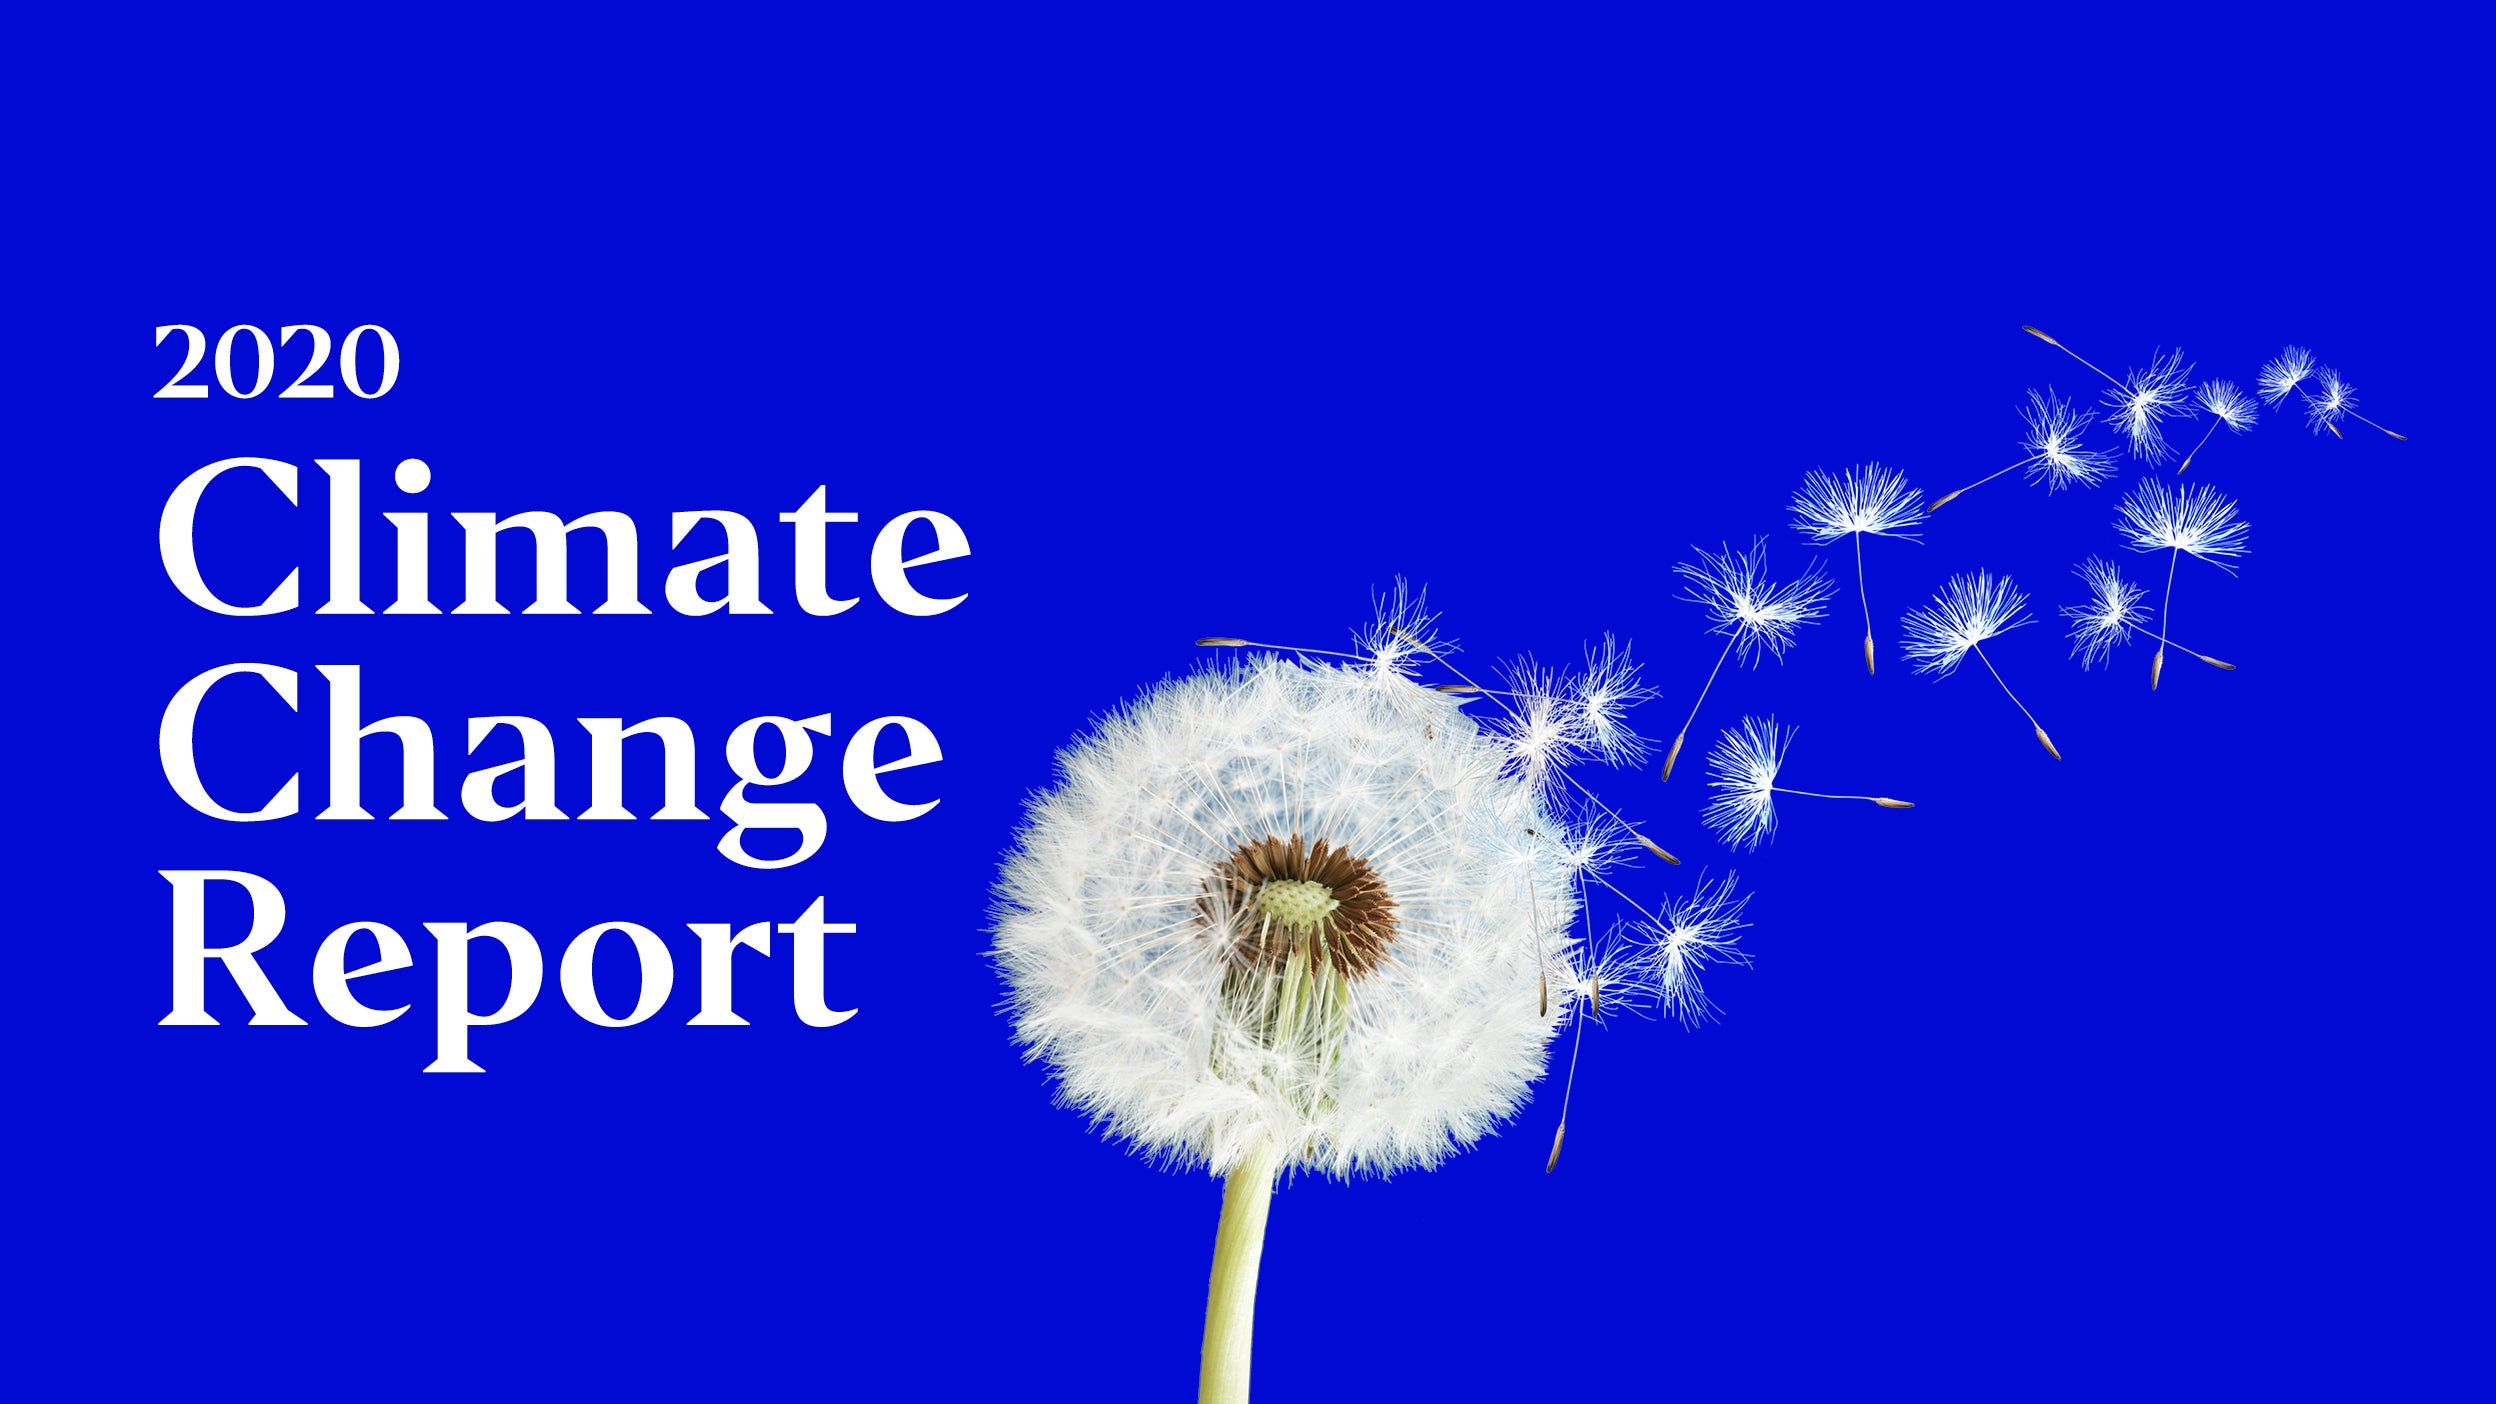 2020 Climate change report